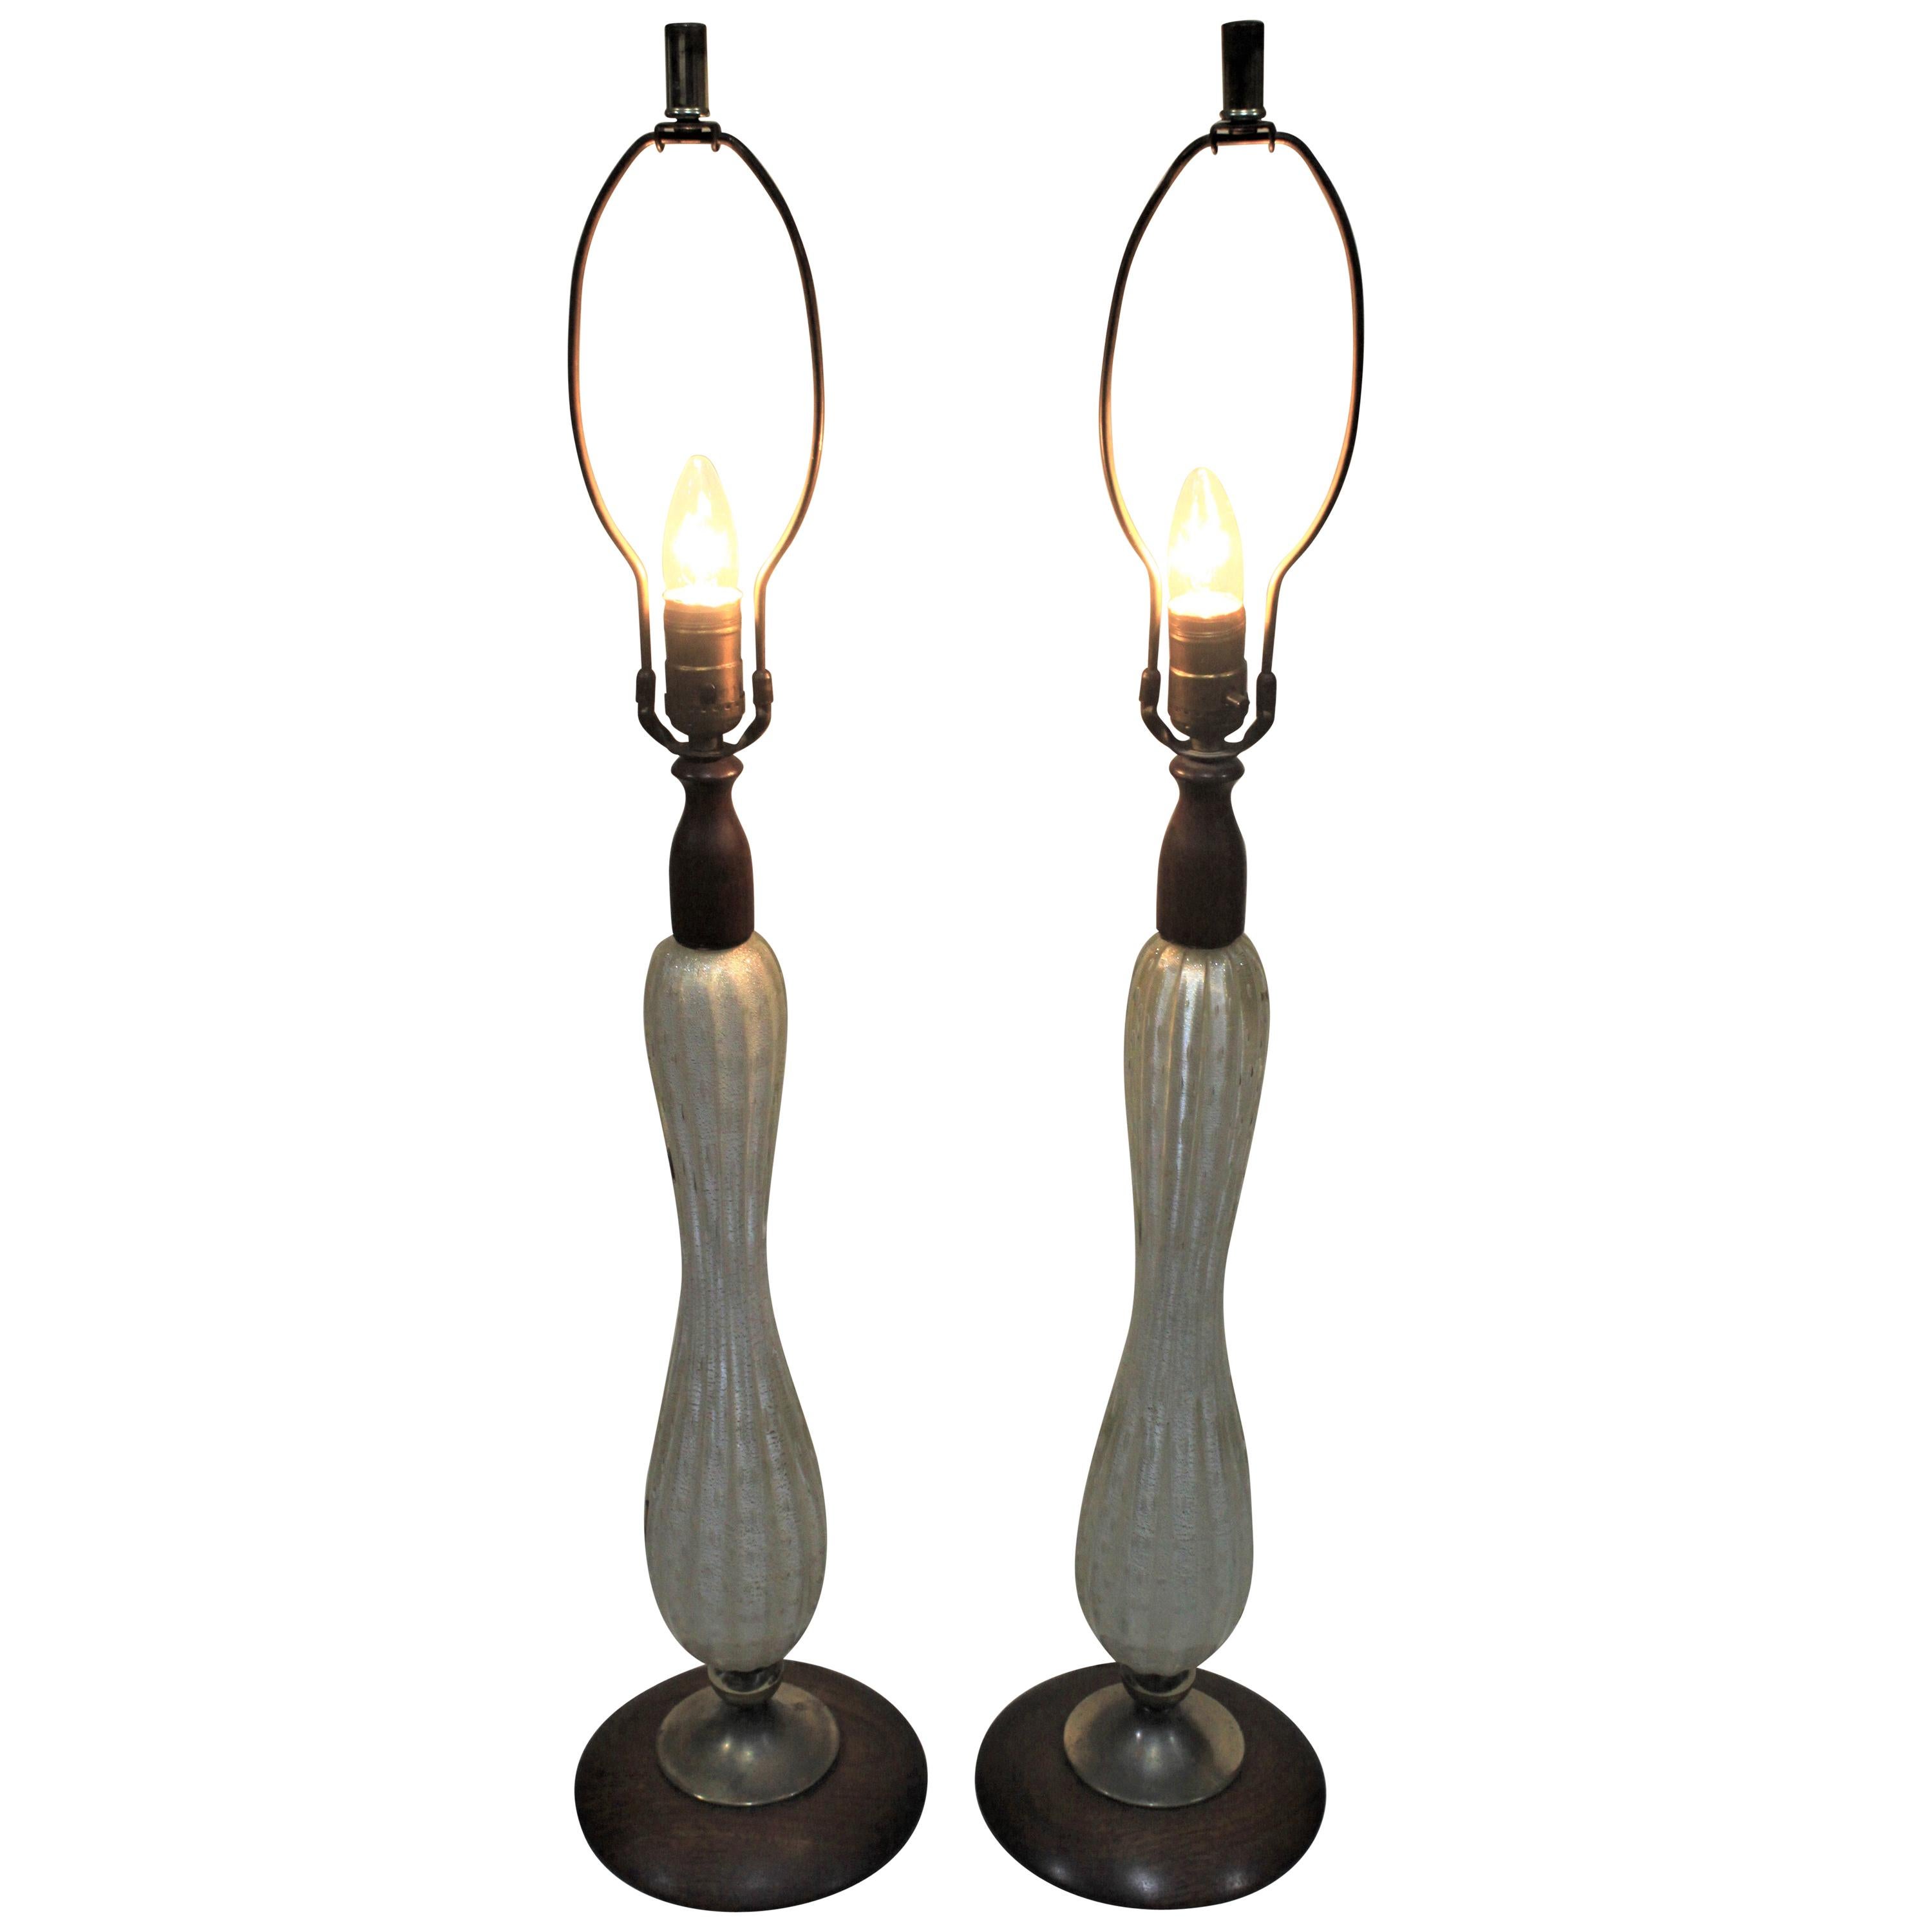 Pair of Mid-Century Modern Murano Art Glass Table Lamps with Teak Accents For Sale